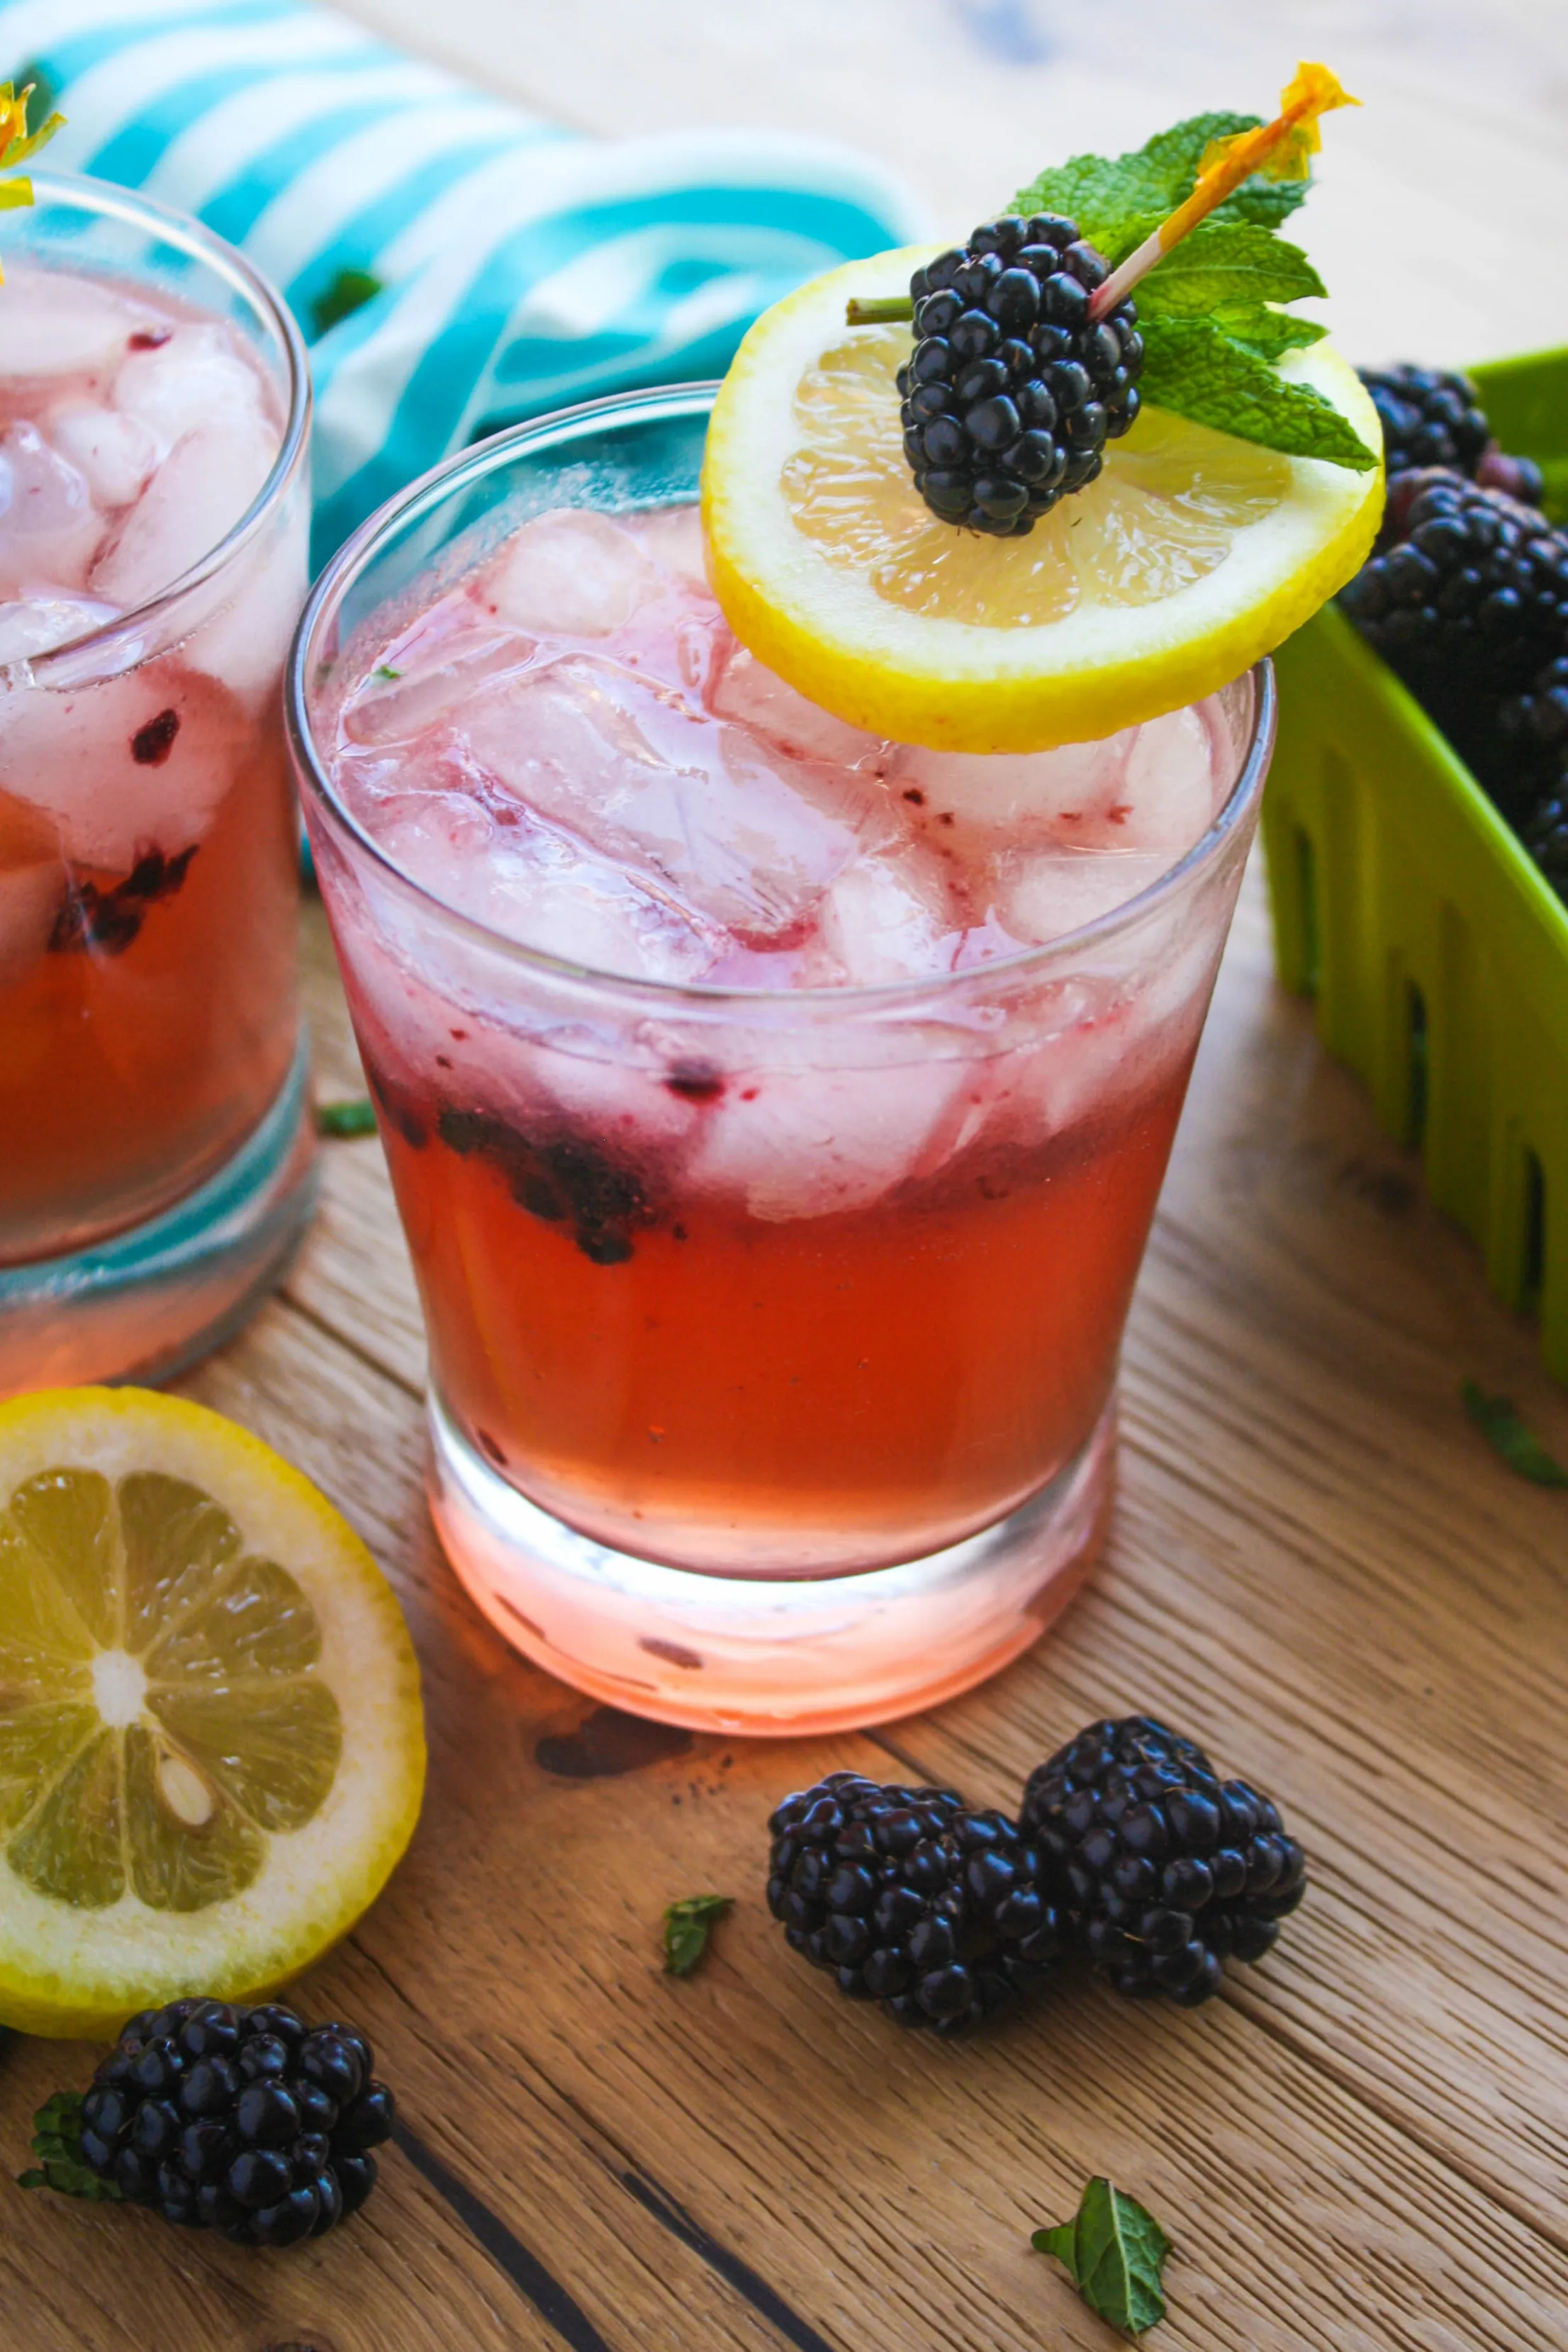 Blackberry Buck Cocktail is a fun drink for the warm weather. The blackberries add great color and flavor!